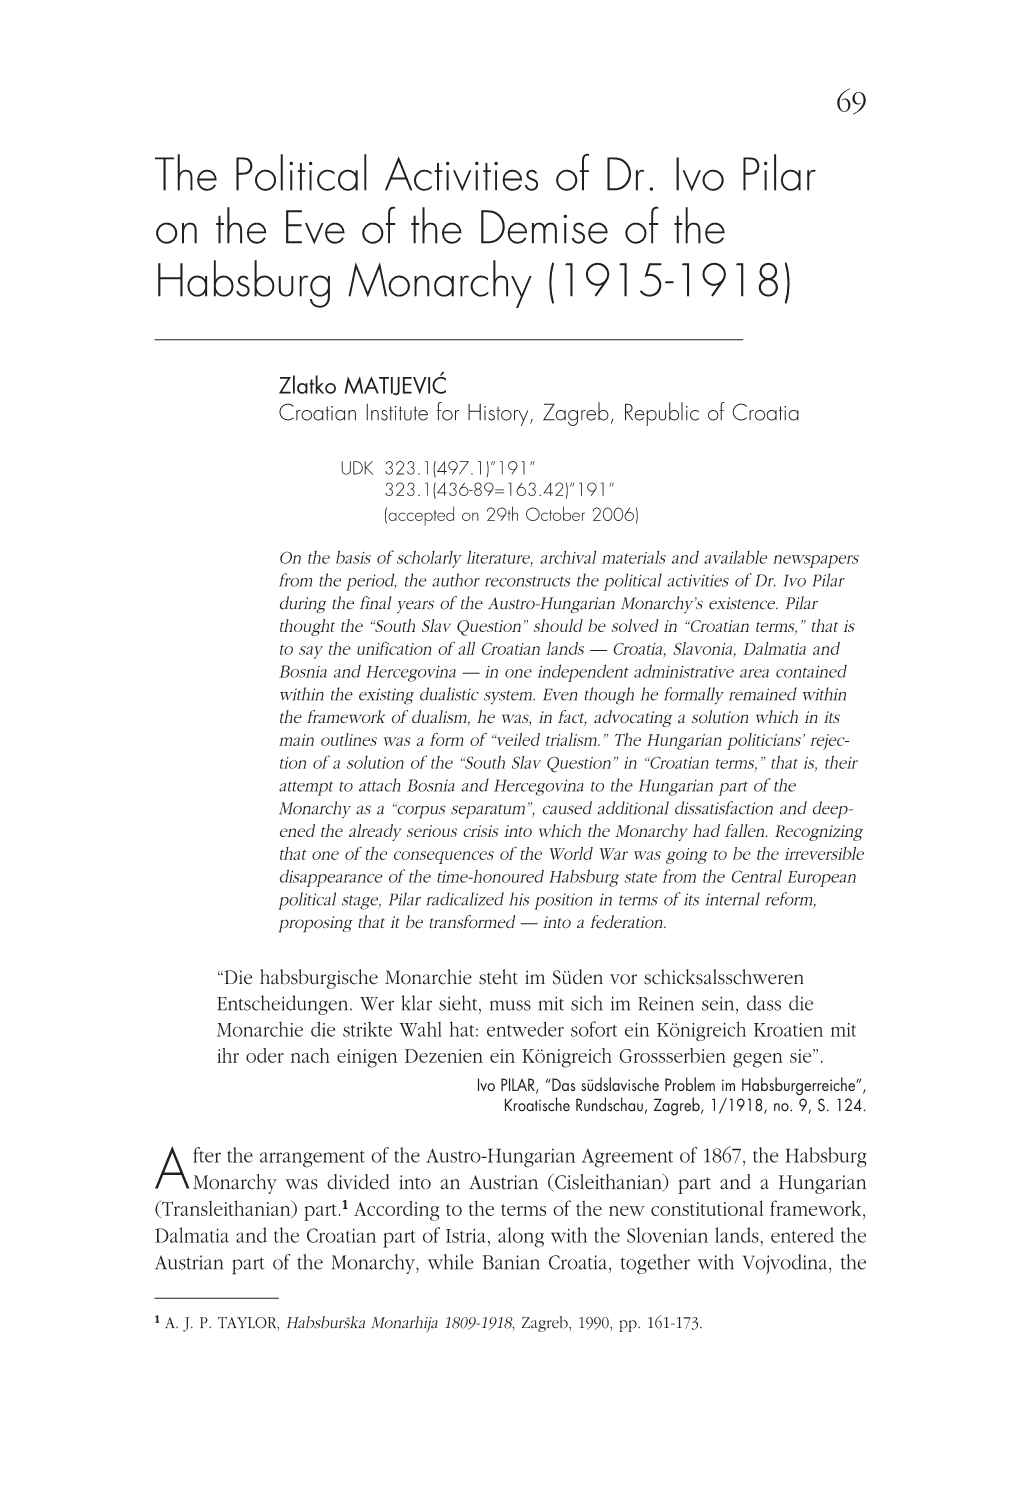 The Political Activities of Dr. Ivo Pilar on the Eve of the Demise of the Habsburg Monarchy (1915-1918)